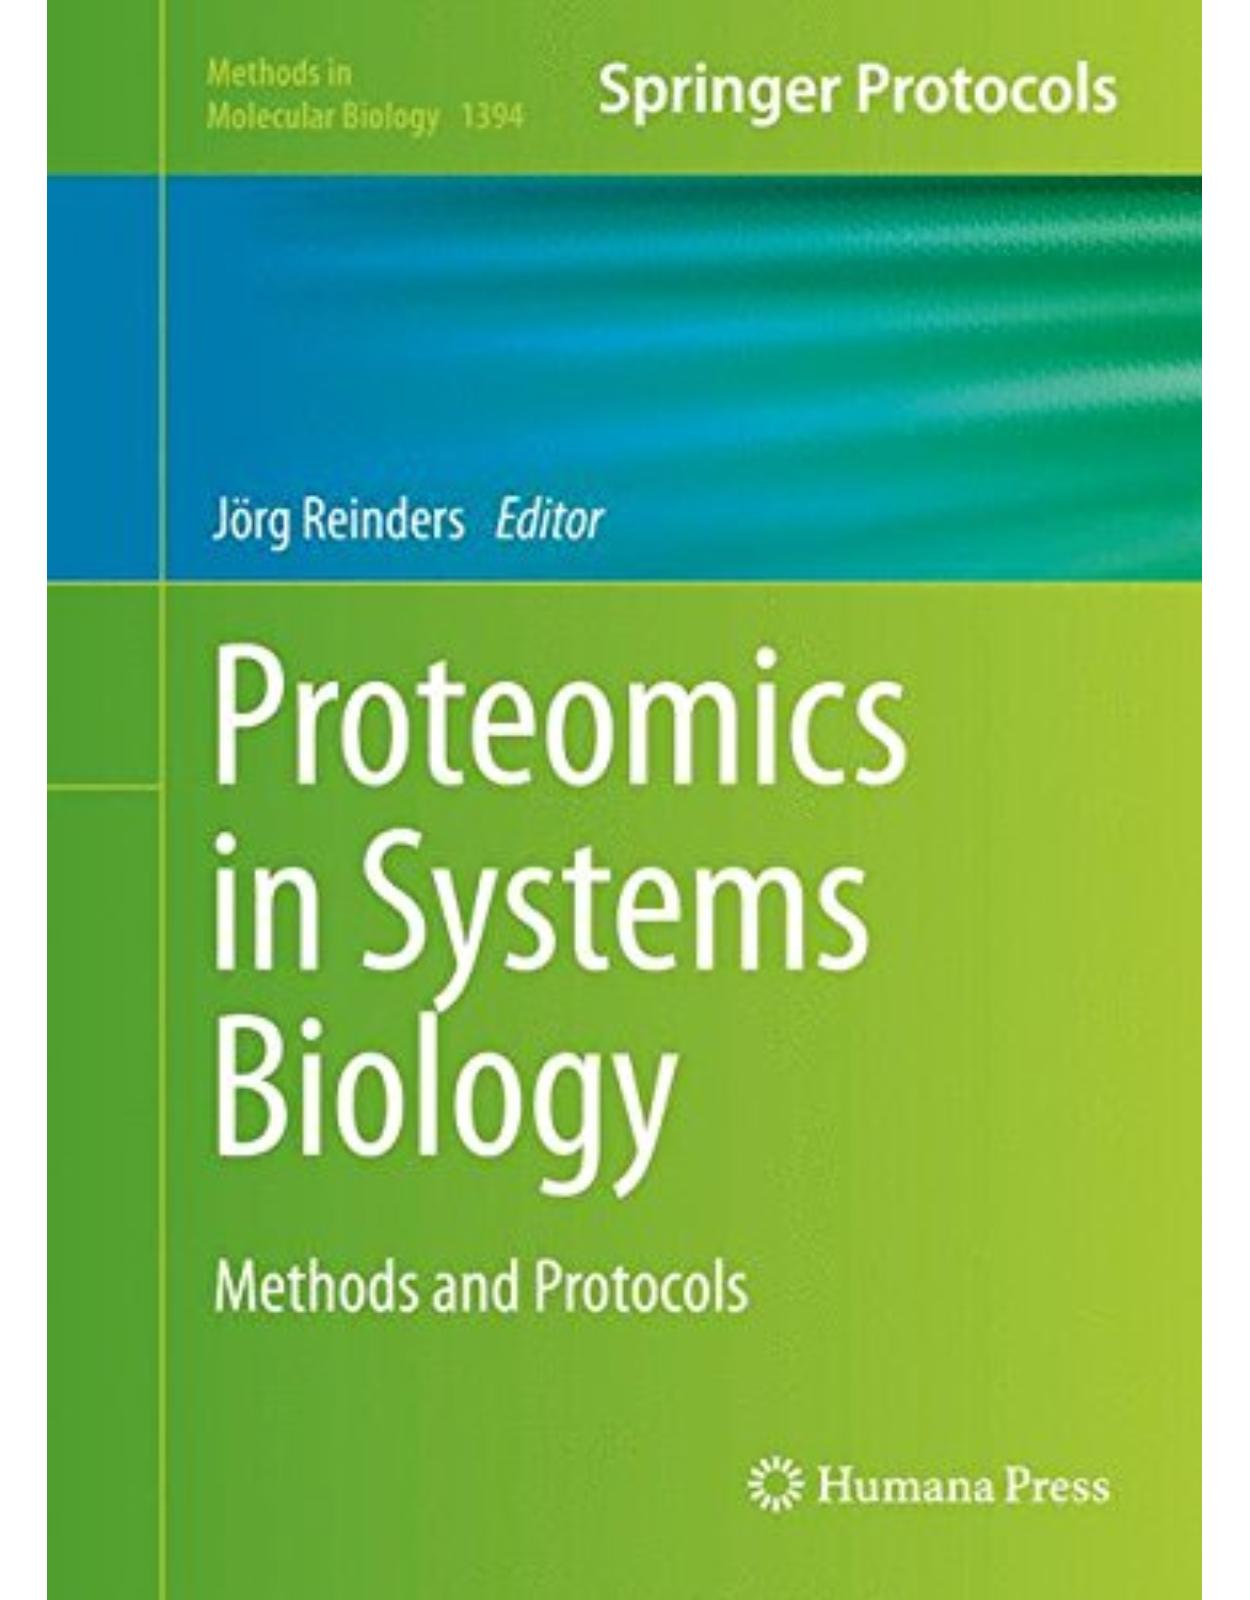 Proteomics in Systems Biology: Methods and Protocols